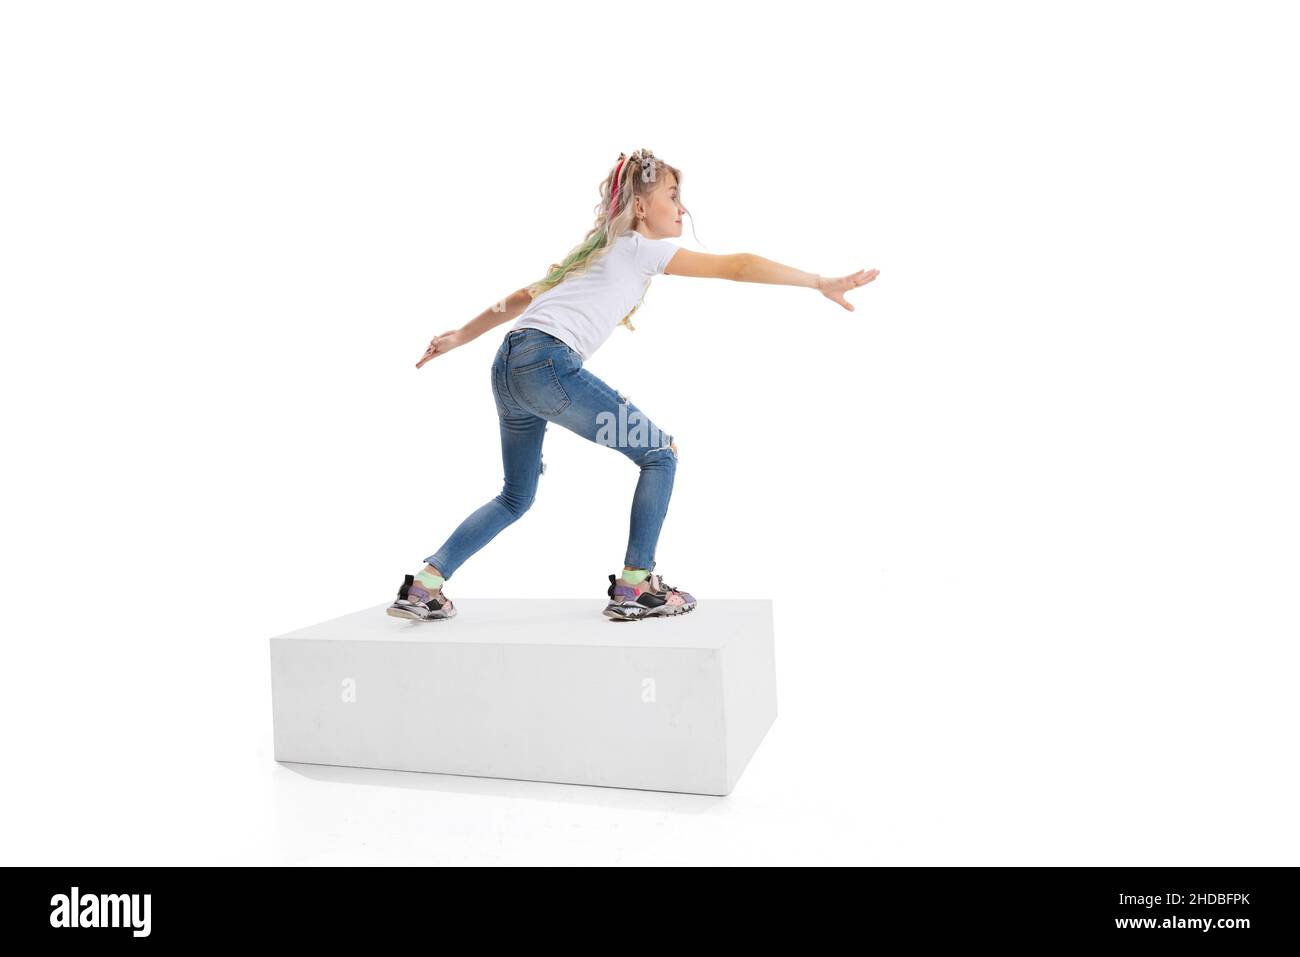 Full-length portrait of smiling girl in casual clothes standing on big box isolated on white studio background. Happy childhood concept. Stock Photo